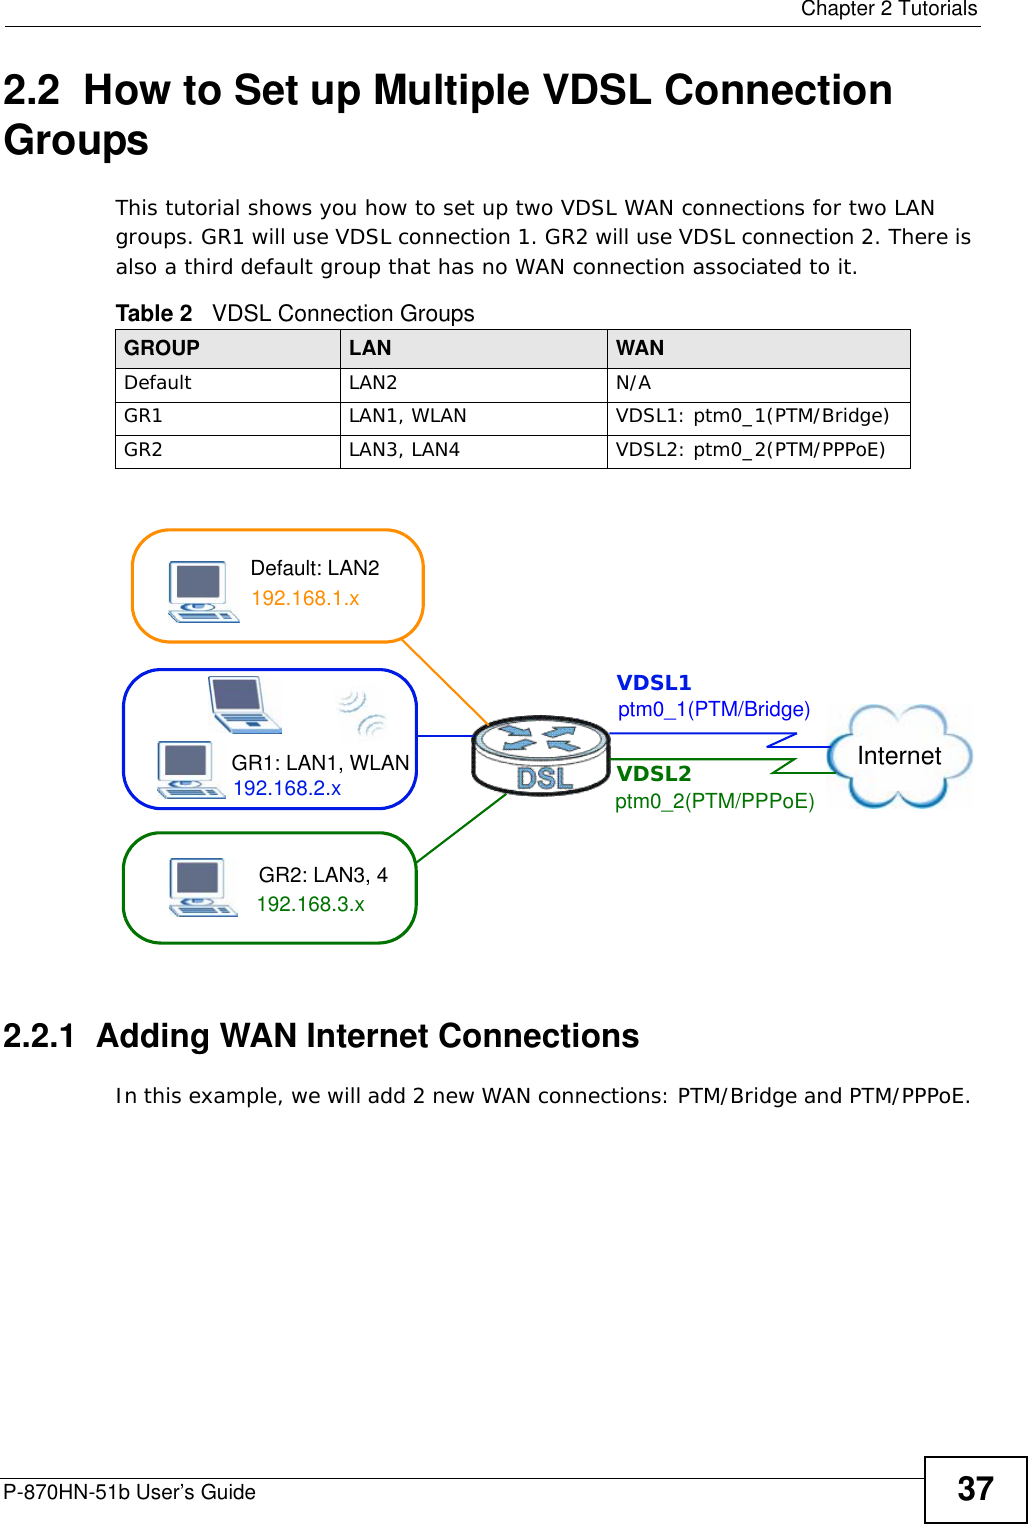  Chapter 2 TutorialsP-870HN-51b User’s Guide 372.2  How to Set up Multiple VDSL Connection GroupsThis tutorial shows you how to set up two VDSL WAN connections for two LAN groups. GR1 will use VDSL connection 1. GR2 will use VDSL connection 2. There is also a third default group that has no WAN connection associated to it.Multiple VDSL Connection Grou ps2.2.1  Adding WAN Internet ConnectionsIn this example, we will add 2 new WAN connections: PTM/Bridge and PTM/PPPoE. Table 2   VDSL Connection Groups GROUP LAN WANDefault LAN2 N/AGR1 LAN1, WLAN VDSL1: ptm0_1(PTM/Bridge)GR2 LAN3, LAN4 VDSL2: ptm0_2(PTM/PPPoE)Default: LAN2Internet192.168.1.x192.168.2.x ptm0_2(PTM/PPPoE)GR1: LAN1, WLAN192.168.3.xGR2: LAN3, 4ptm0_1(PTM/Bridge)VDSL1VDSL2